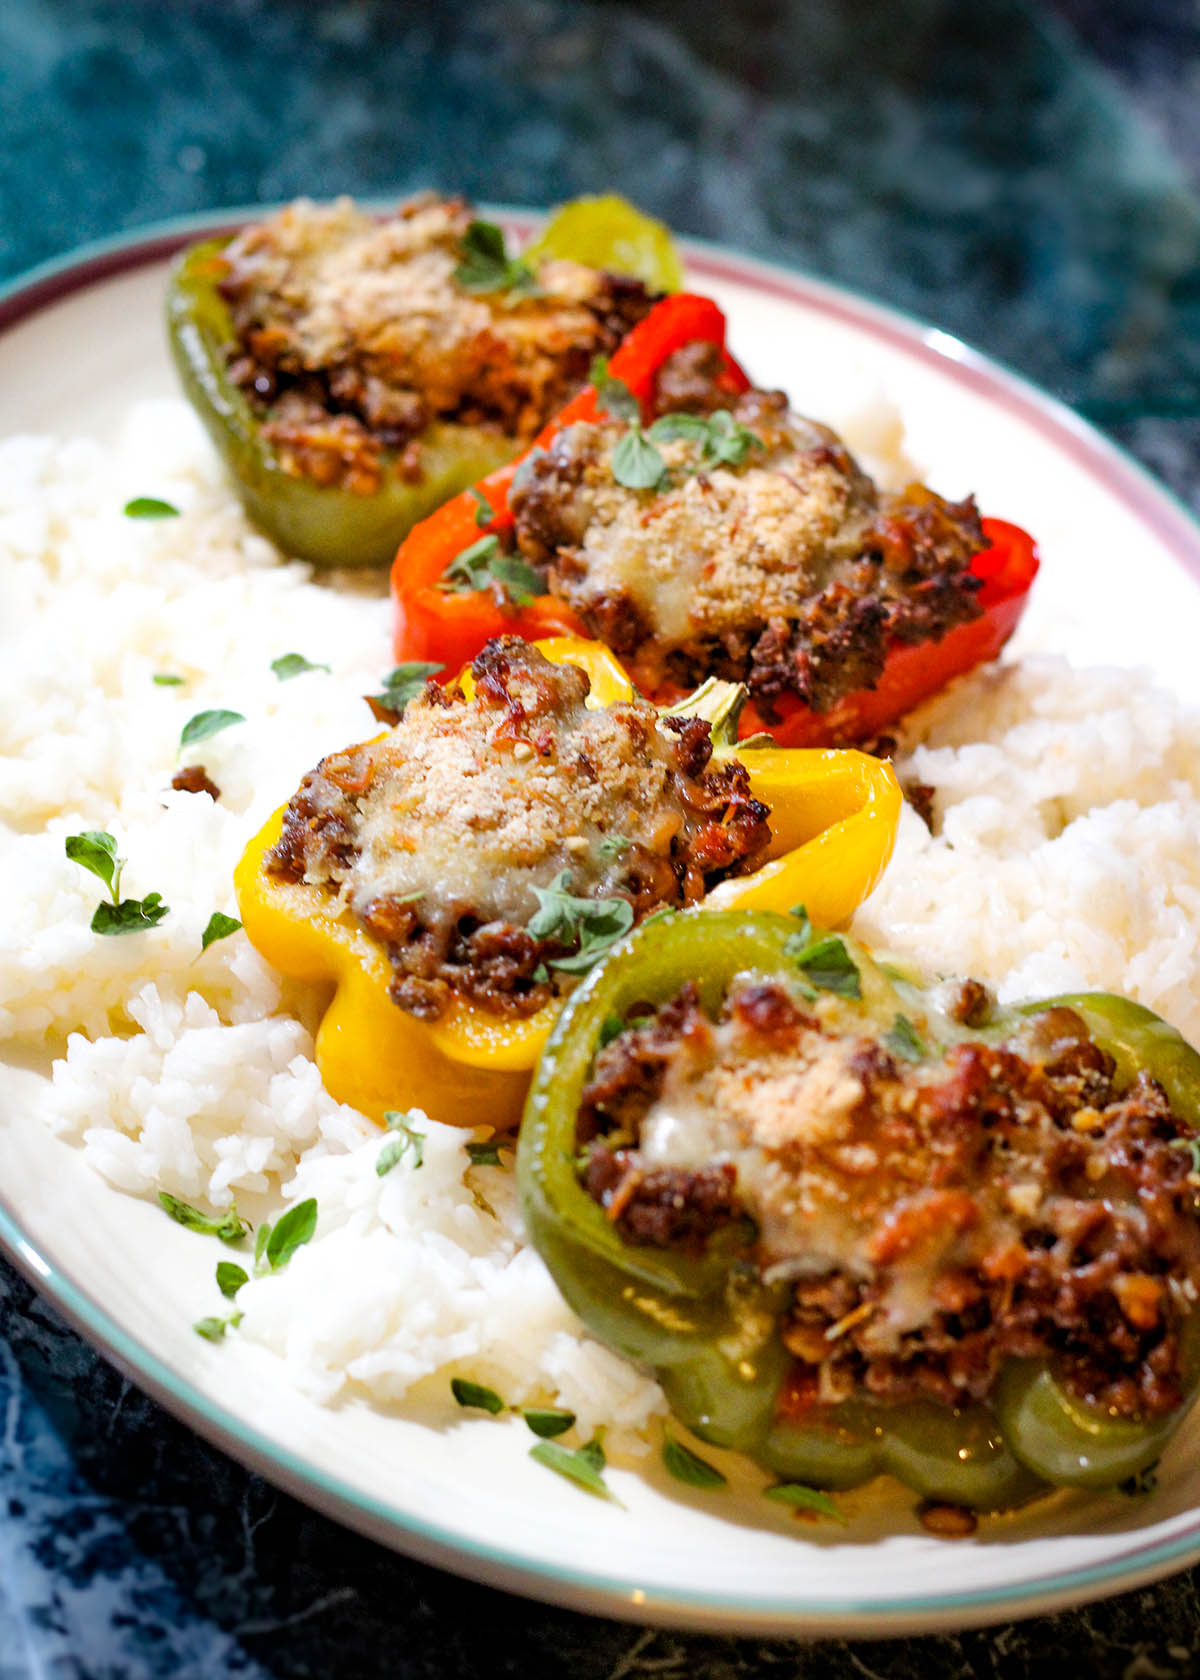 Large platter with halved bell peppers in a variety of colors filled with recipe and served over white rice.